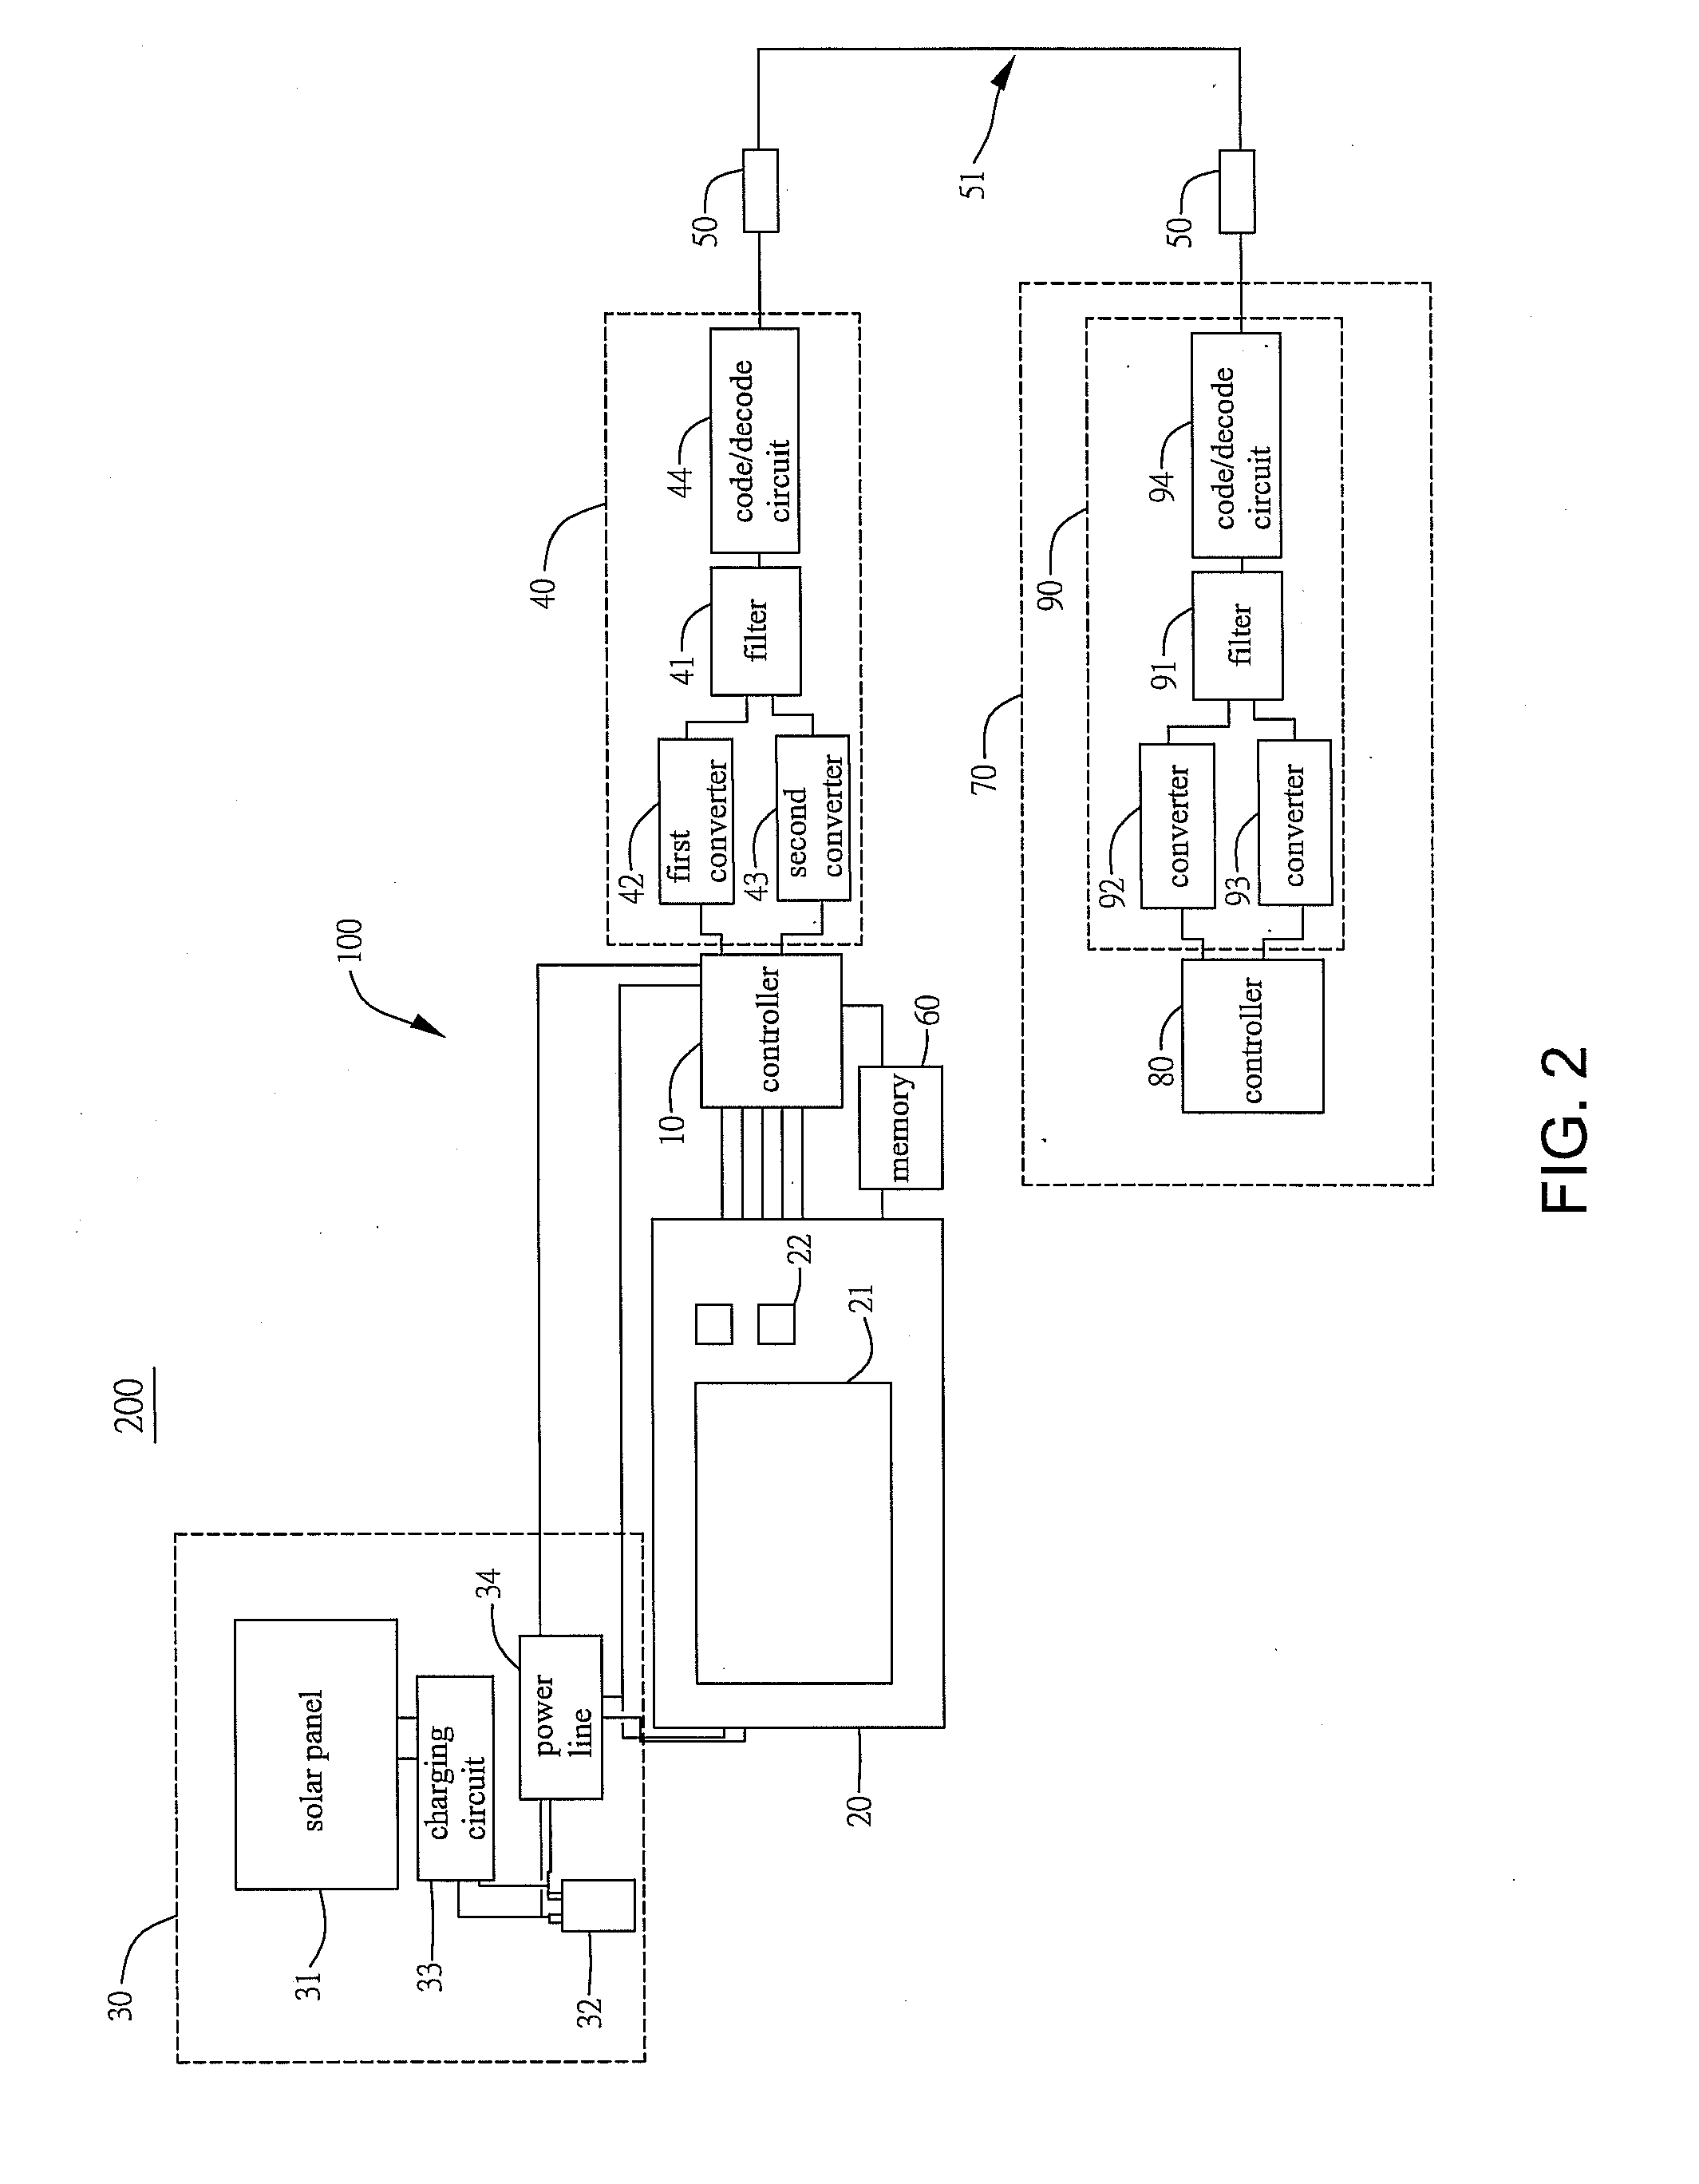 Controlling device and system